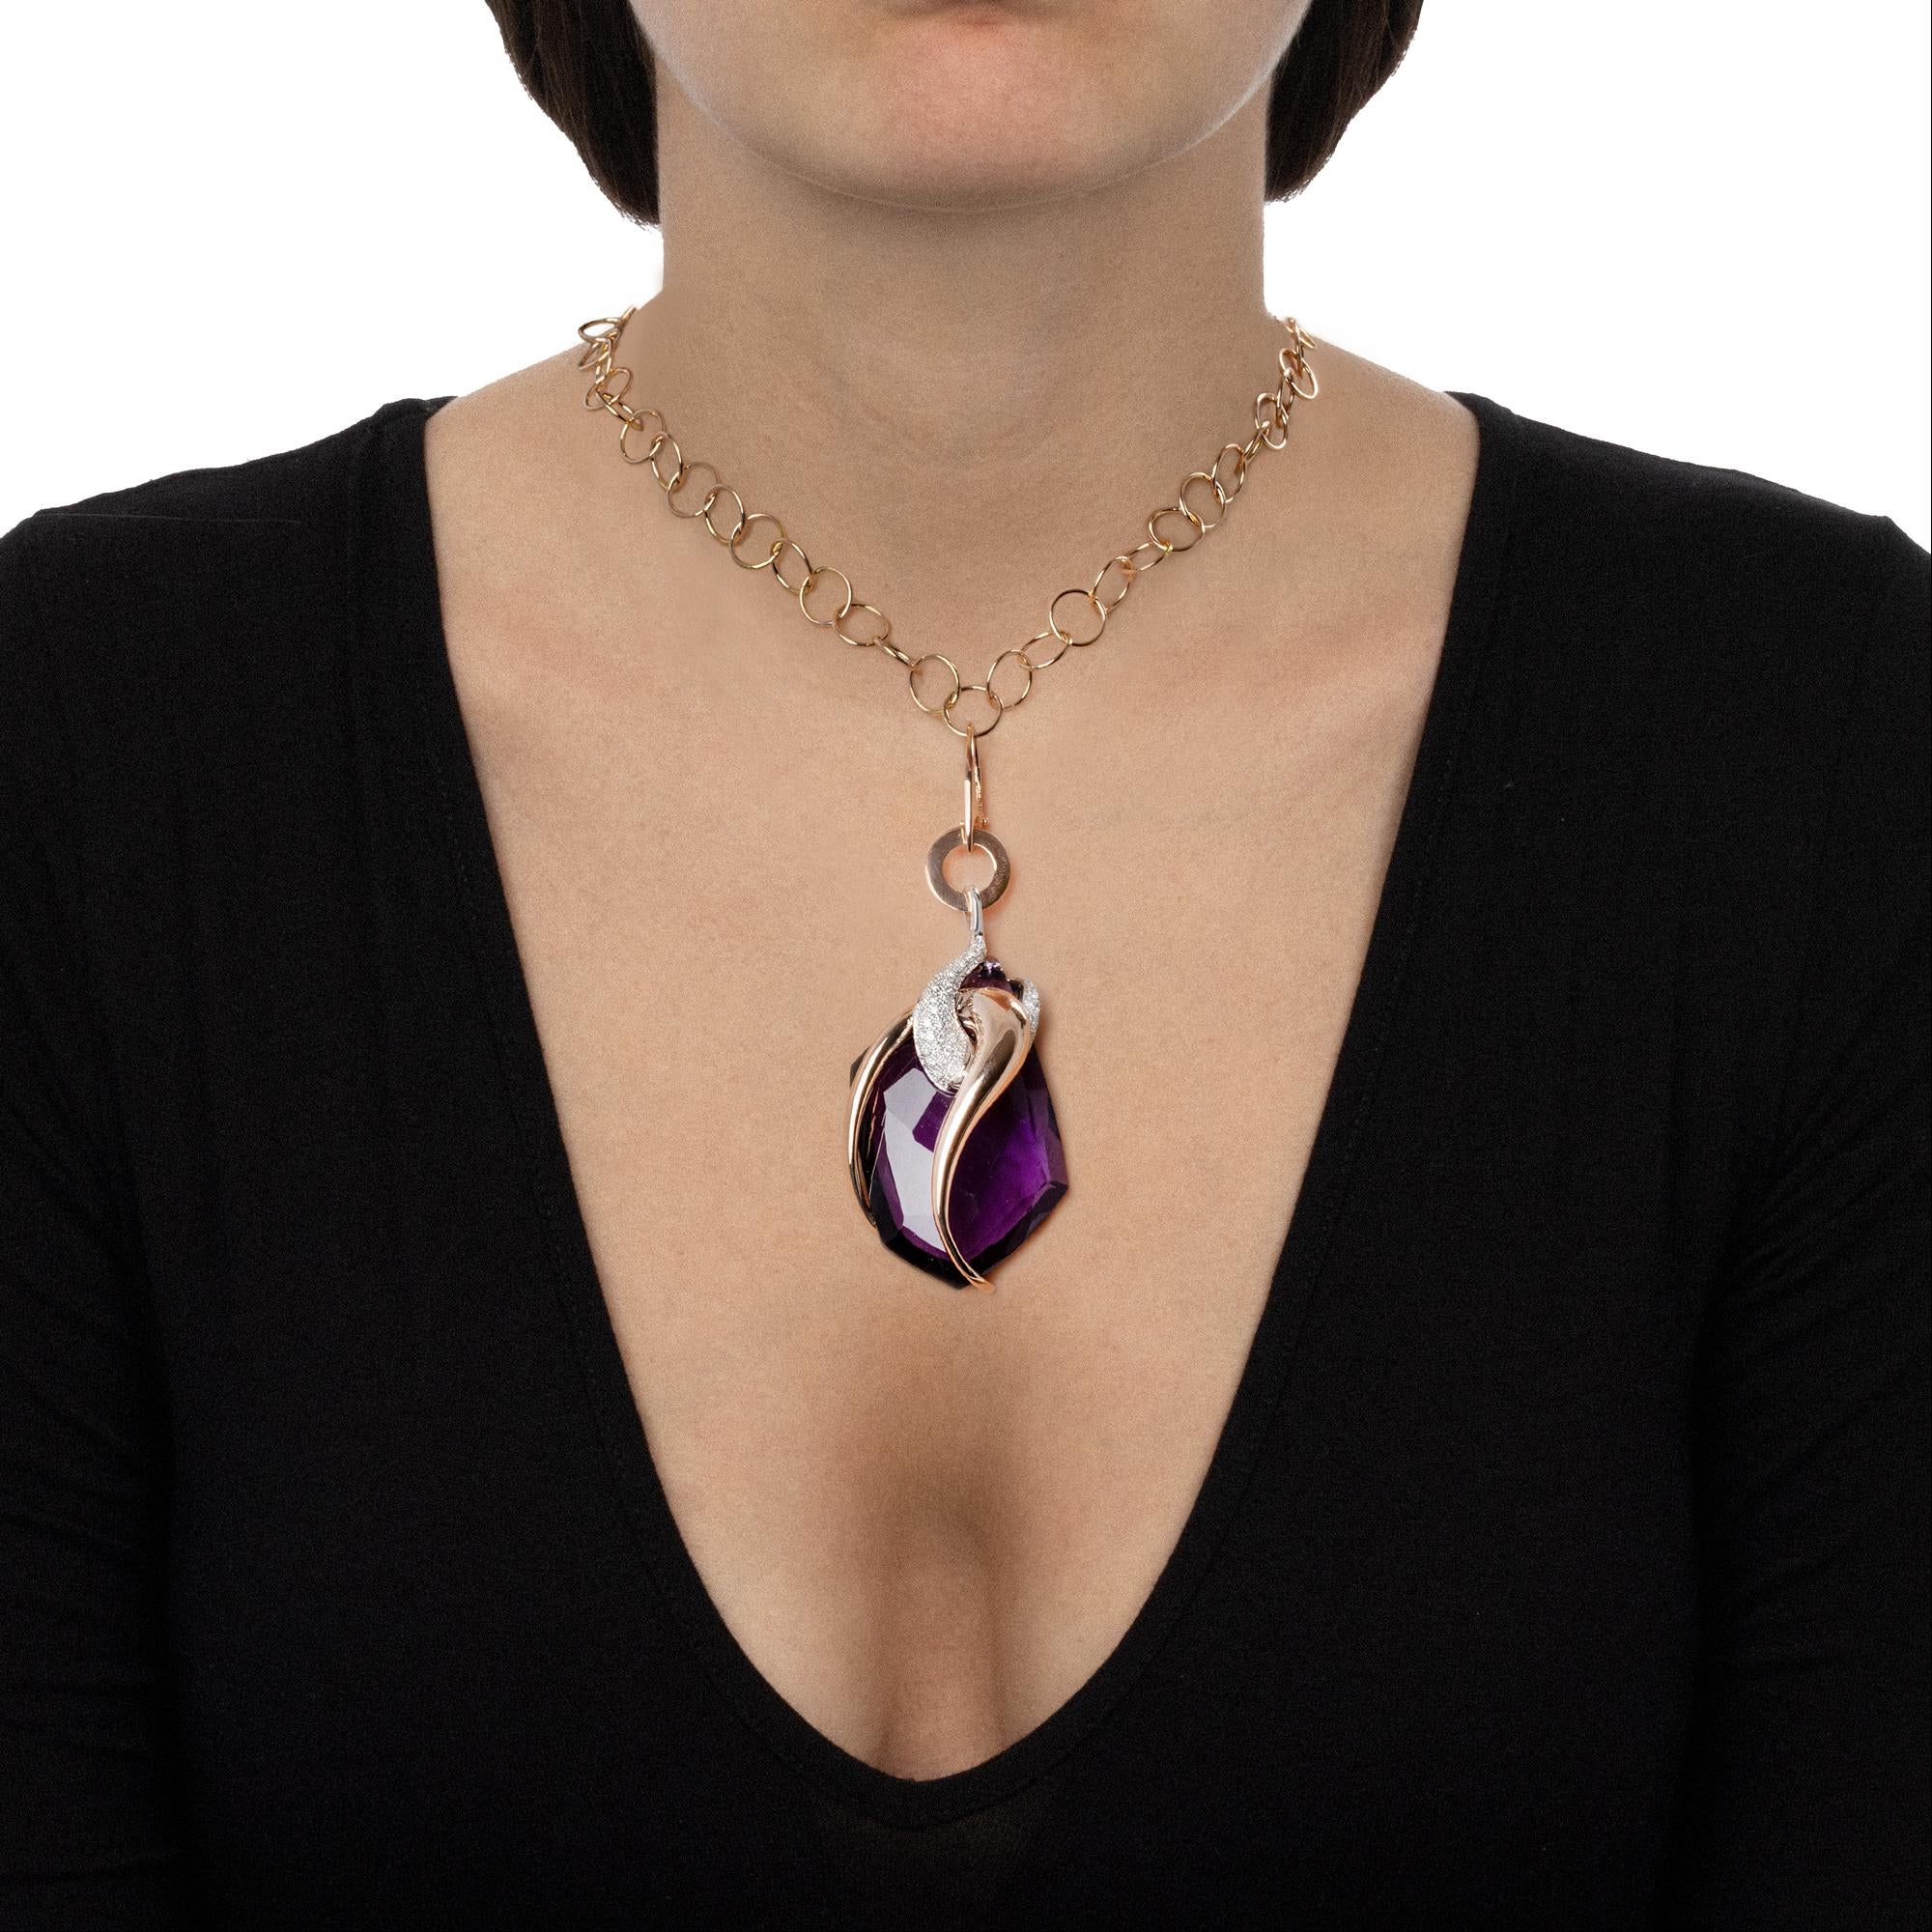 A handmade contemporary jewelery piece with a modern design, this pendant necklace is a dazzling fashion statement. The evocative charm of the central amethyst blends with the innovative design of the intertwined decoration blends with the embrace